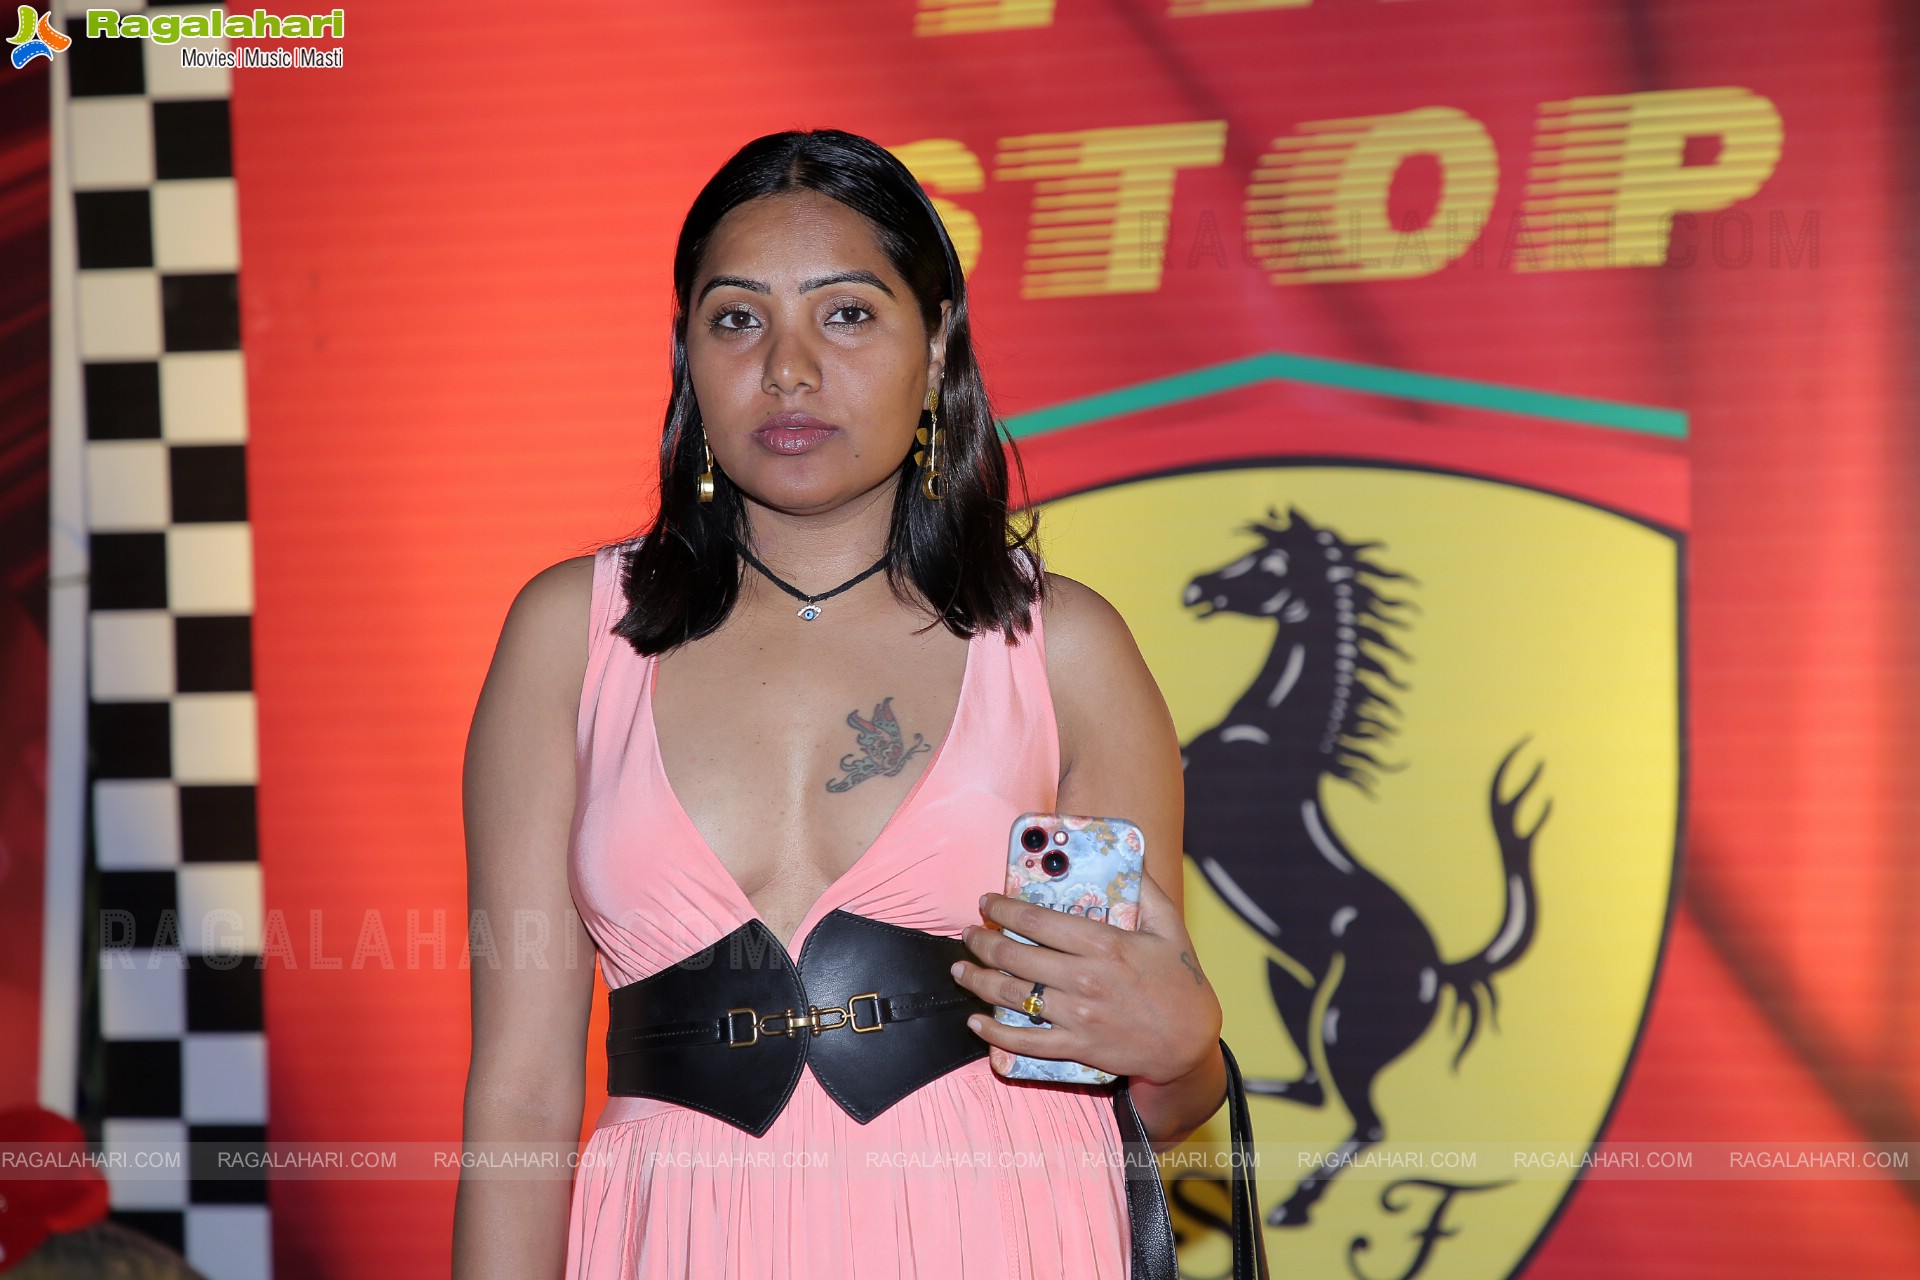 Lion Kiron 'K1 Party' Fashion Show 2022 at Jalavihar, Necklace Road